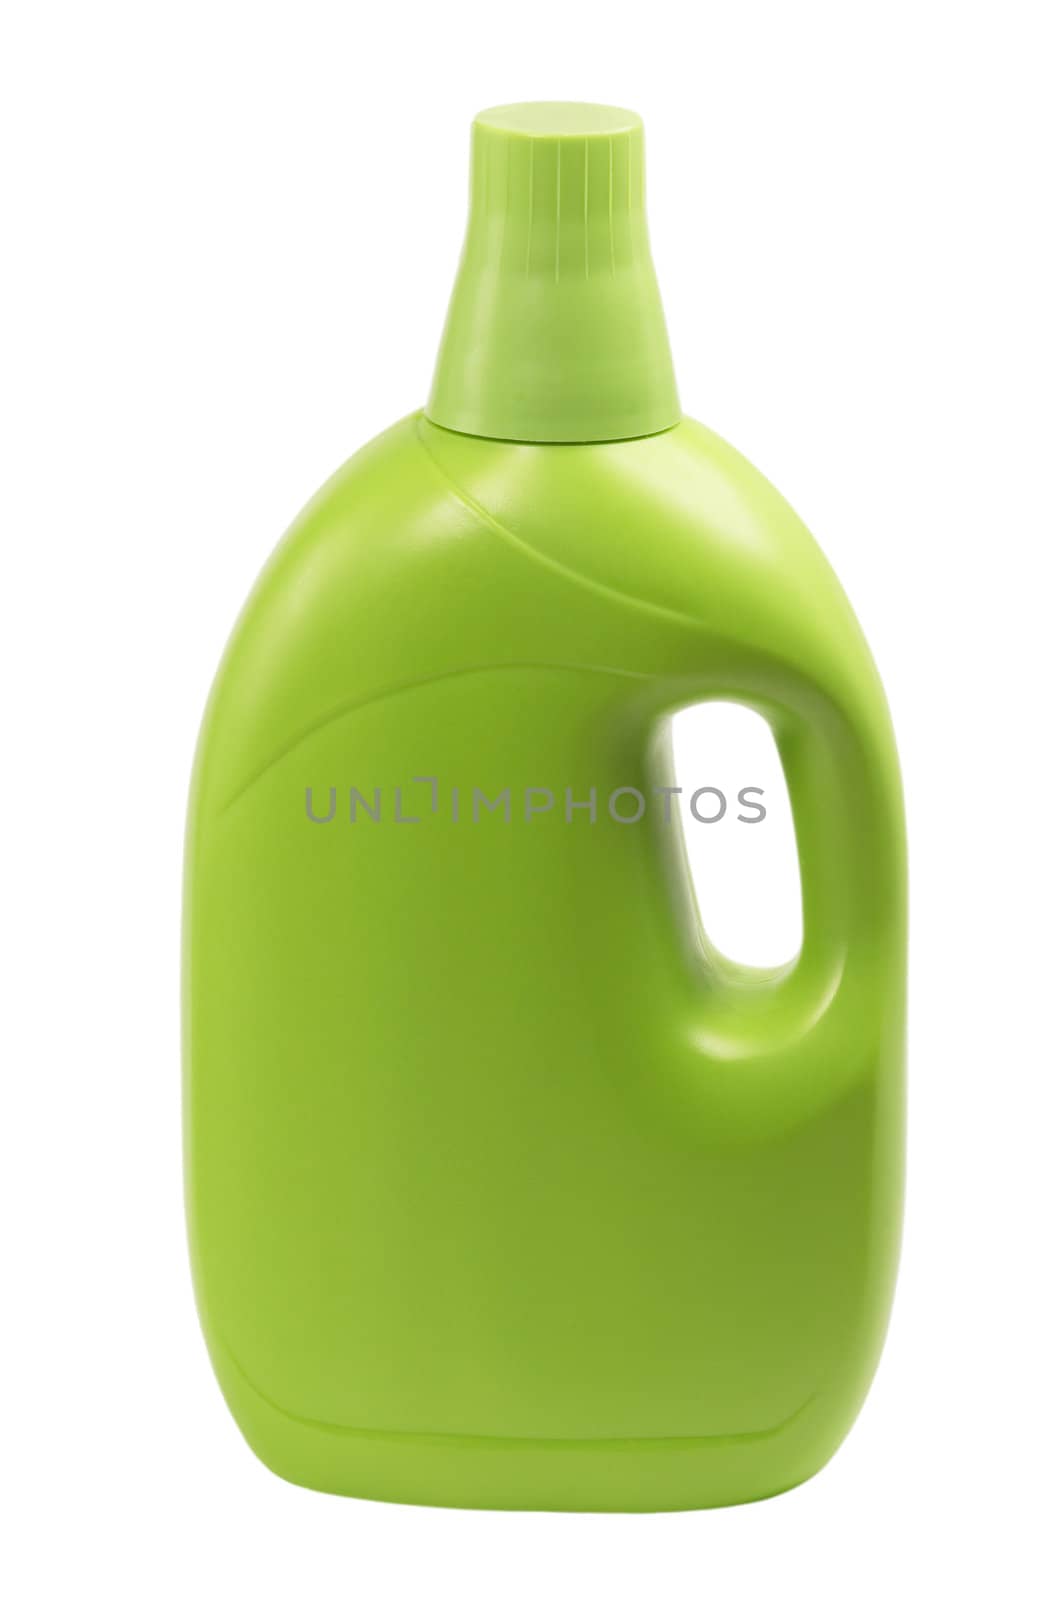 coulored plastic bottle isolated on white background